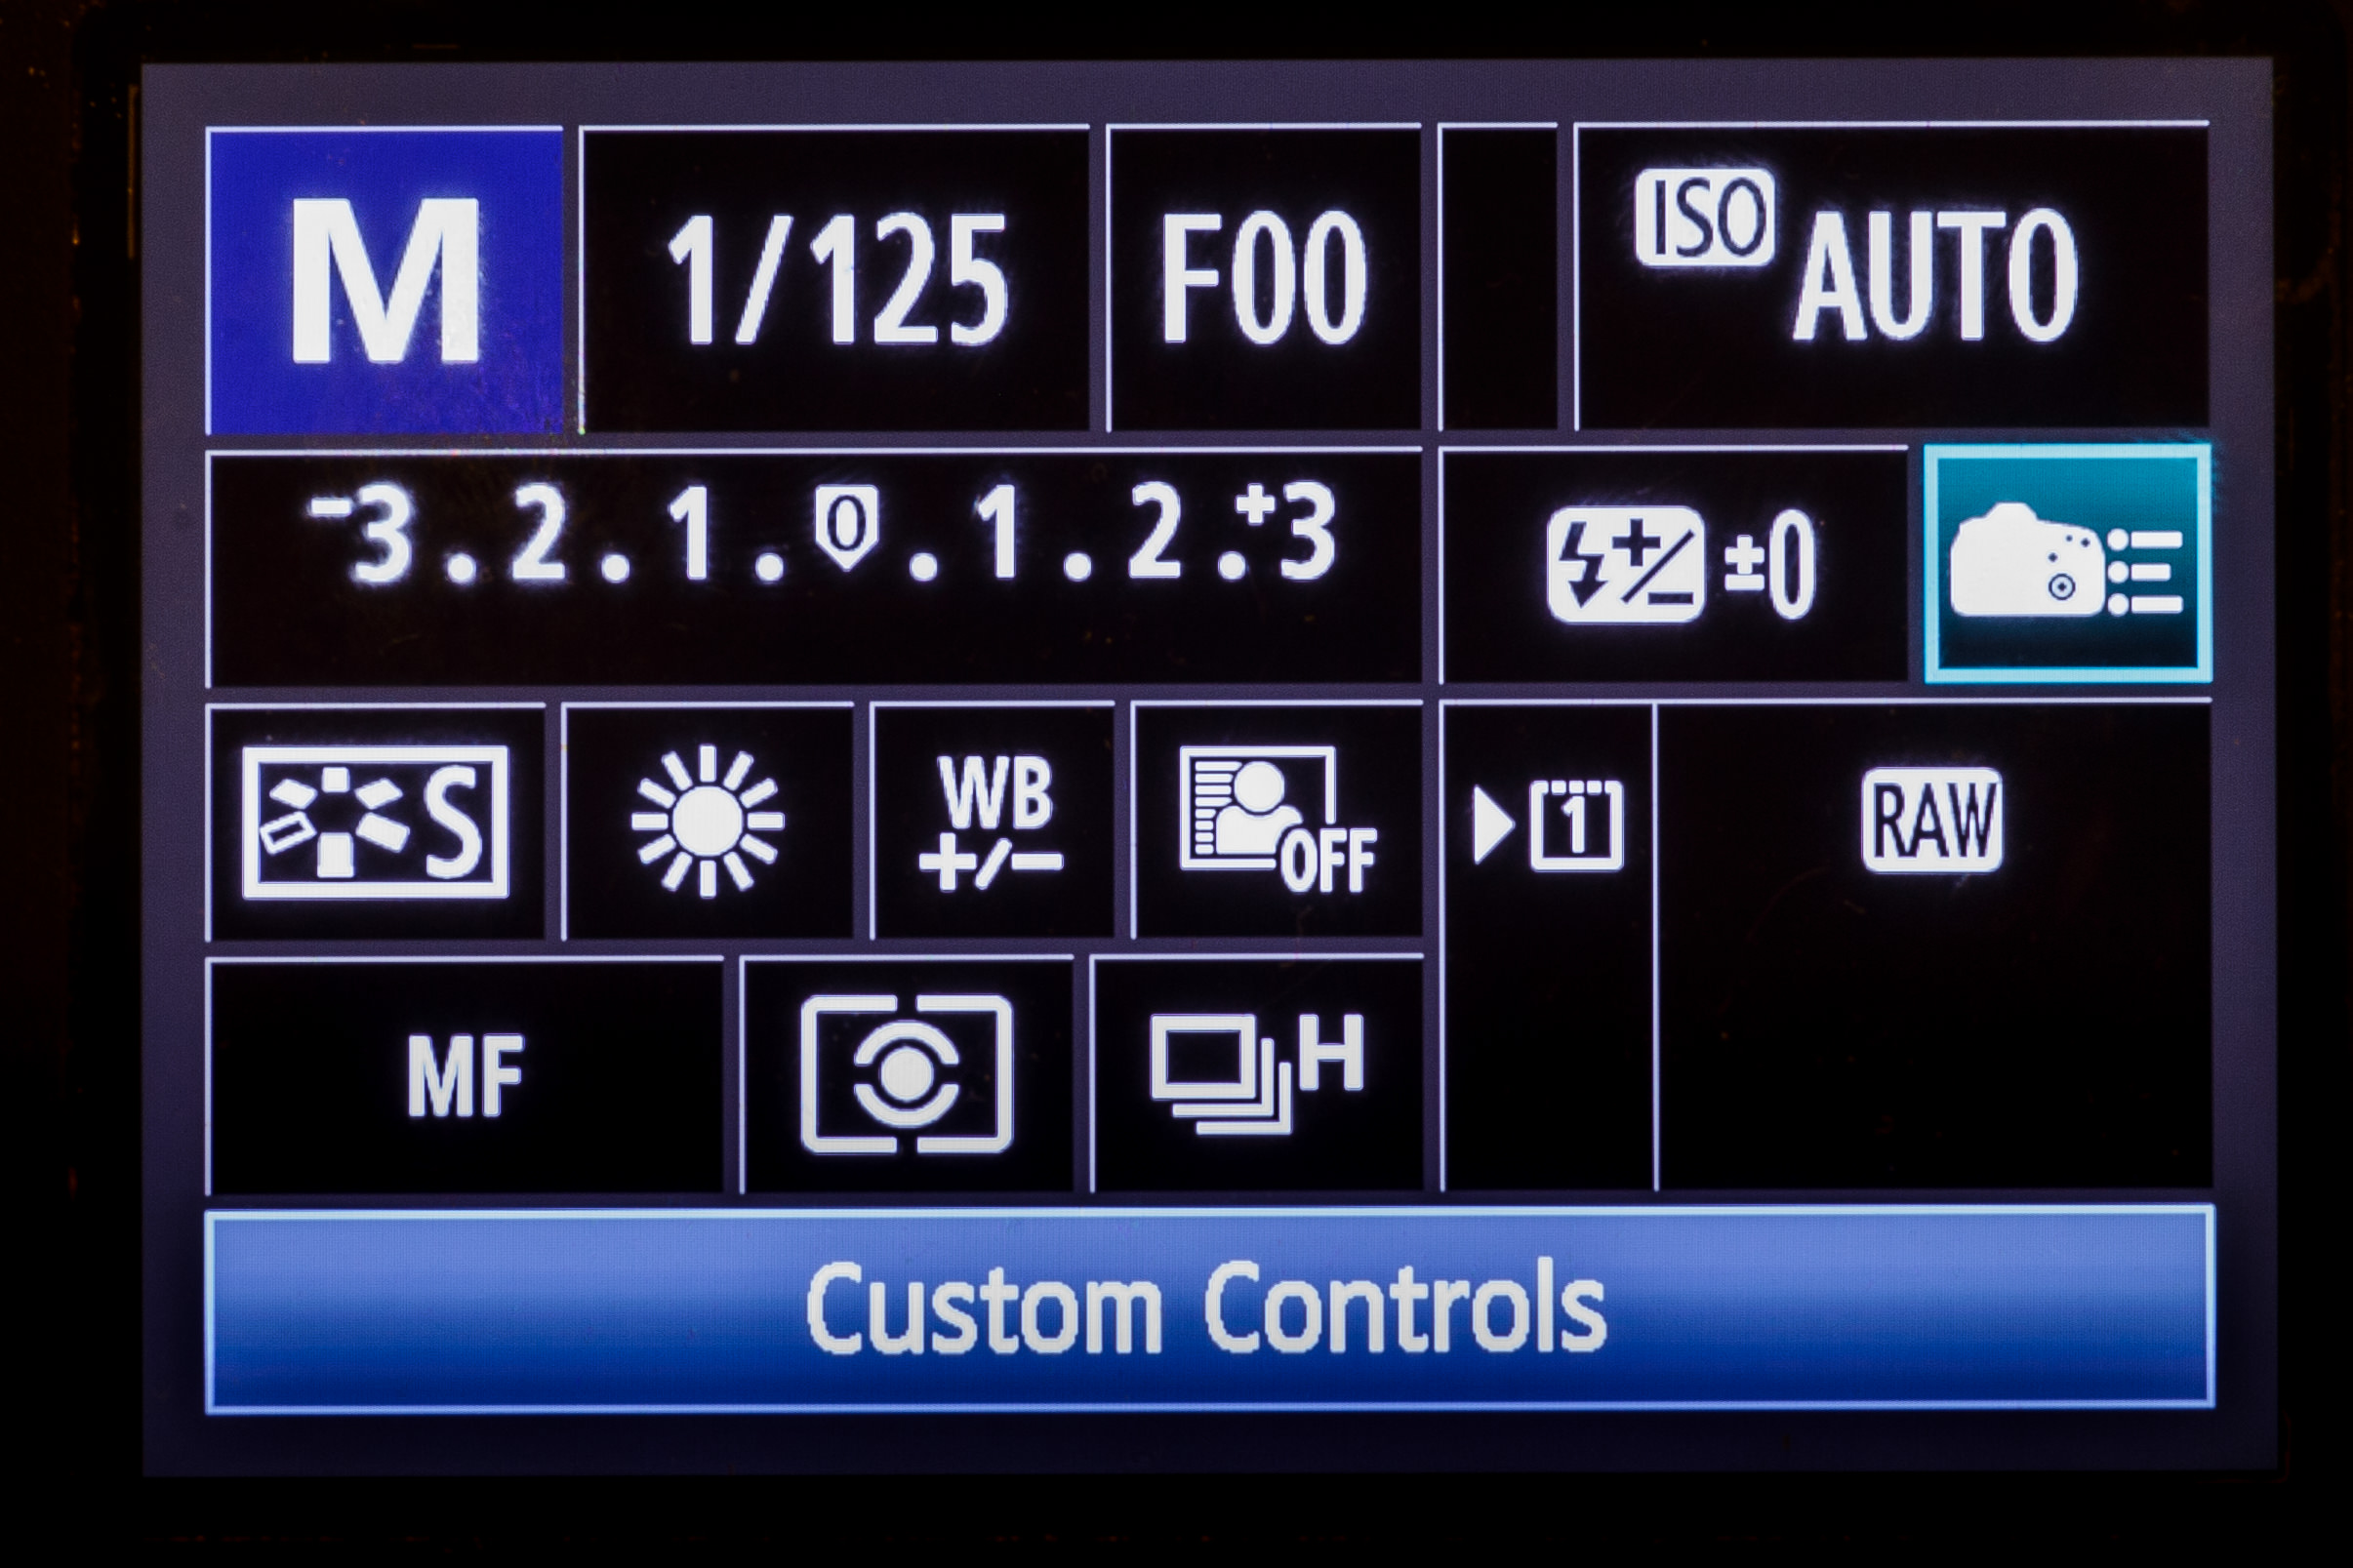 The Quick Menu on a Canon 5D MIII. The Custom Controls icon is highlighted.